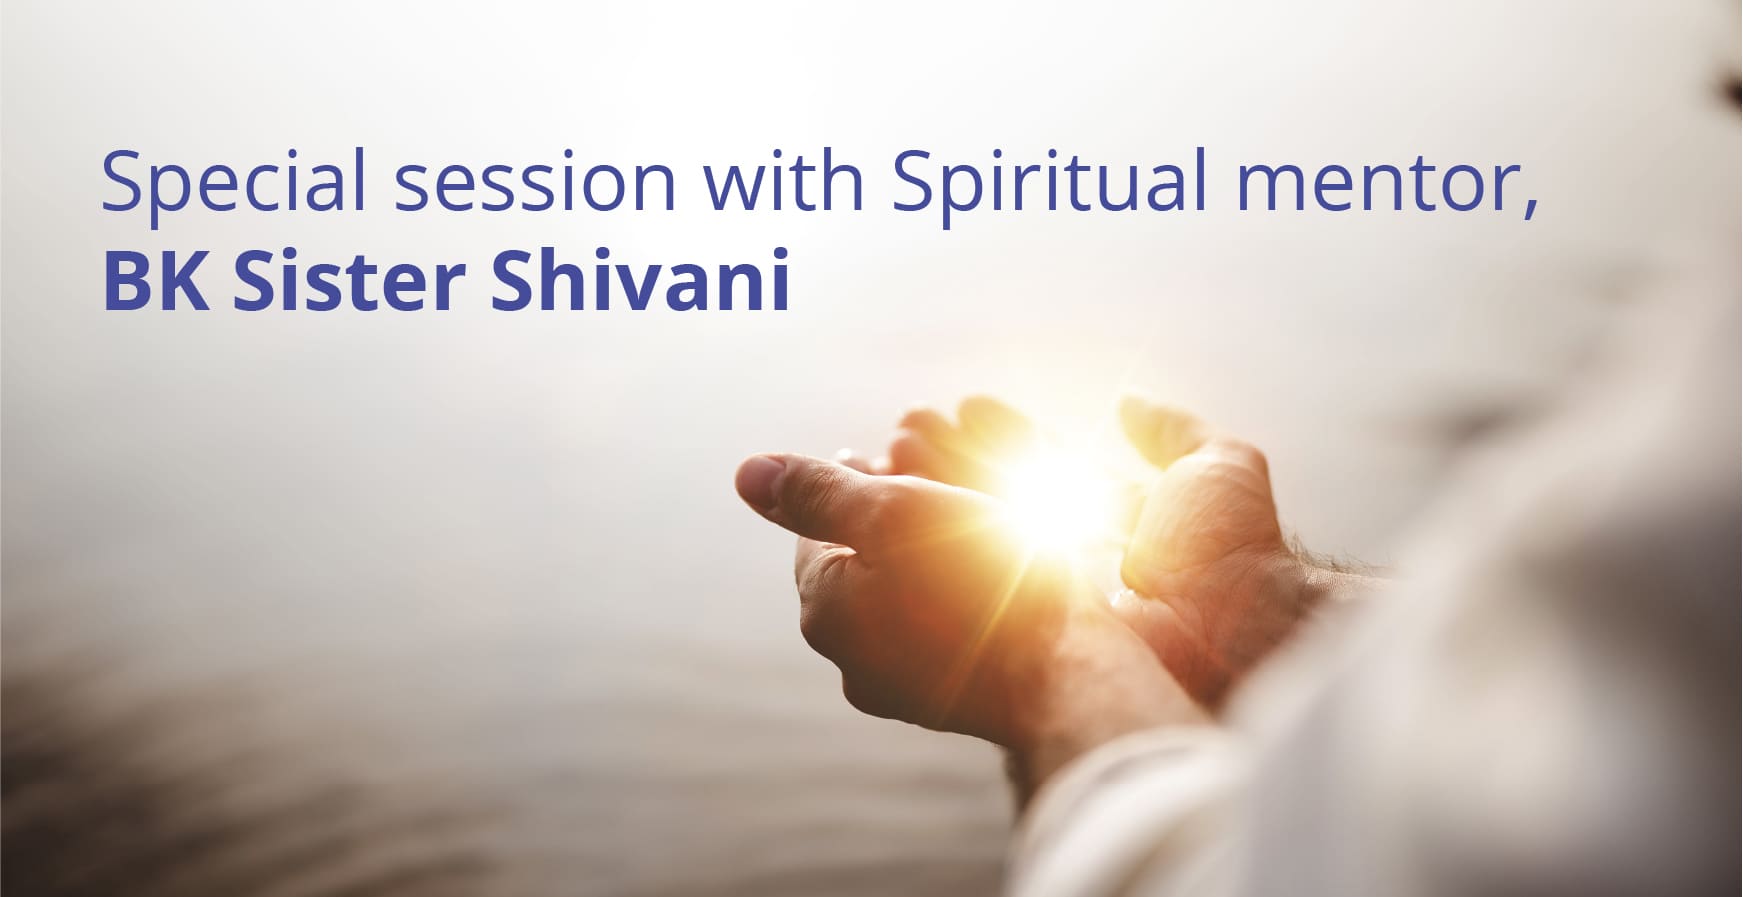 Spiritual session on mental health and well-being